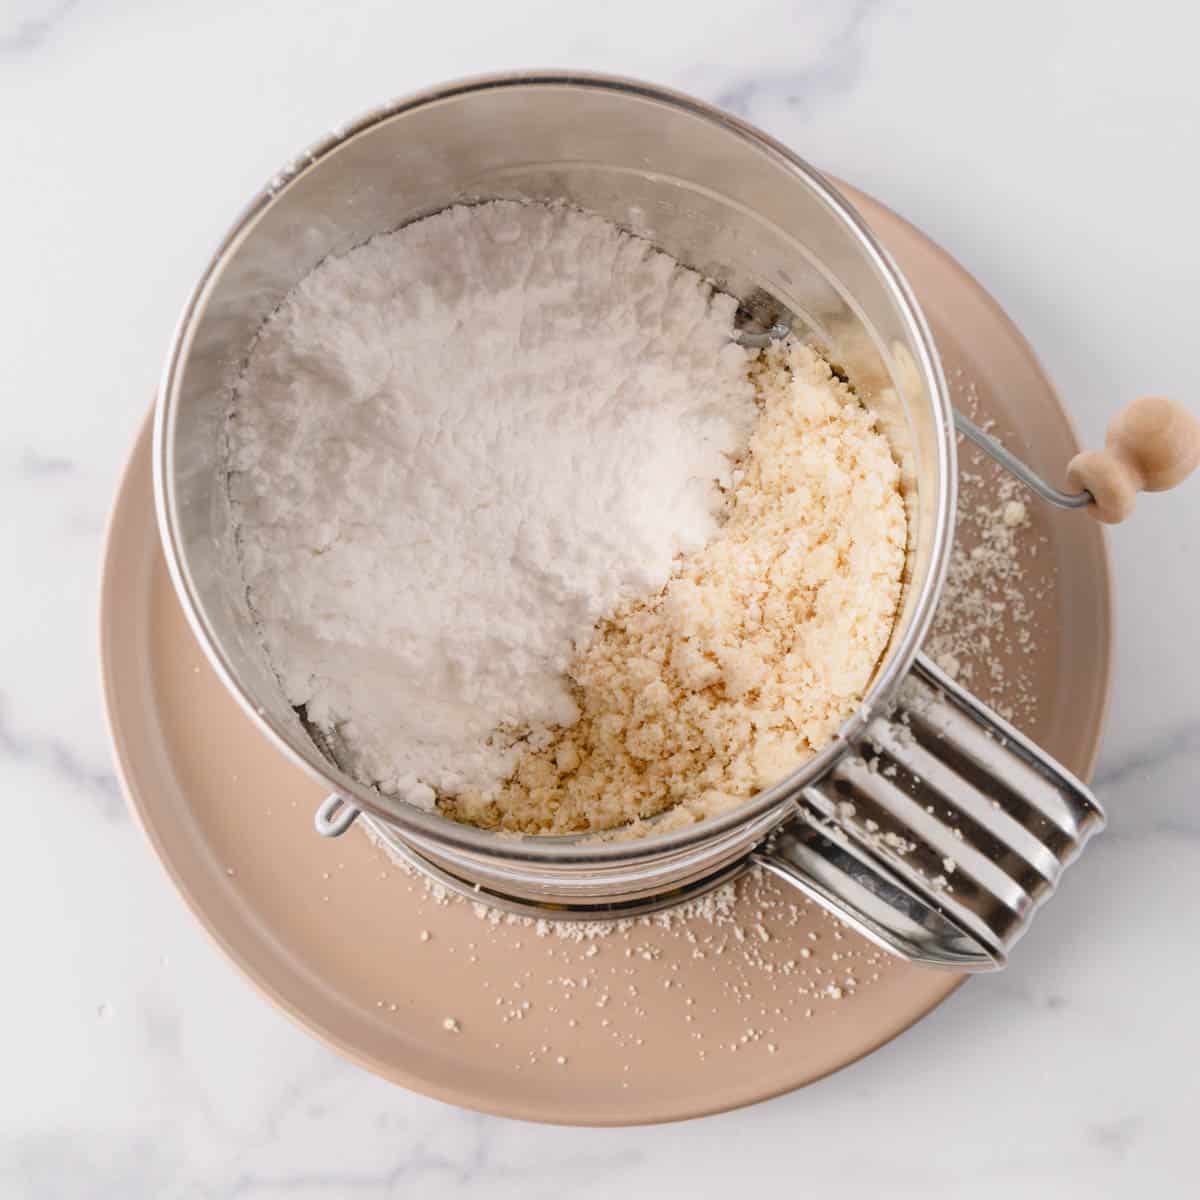 Powdered sugar and almond flour in a hand-crank sifter.